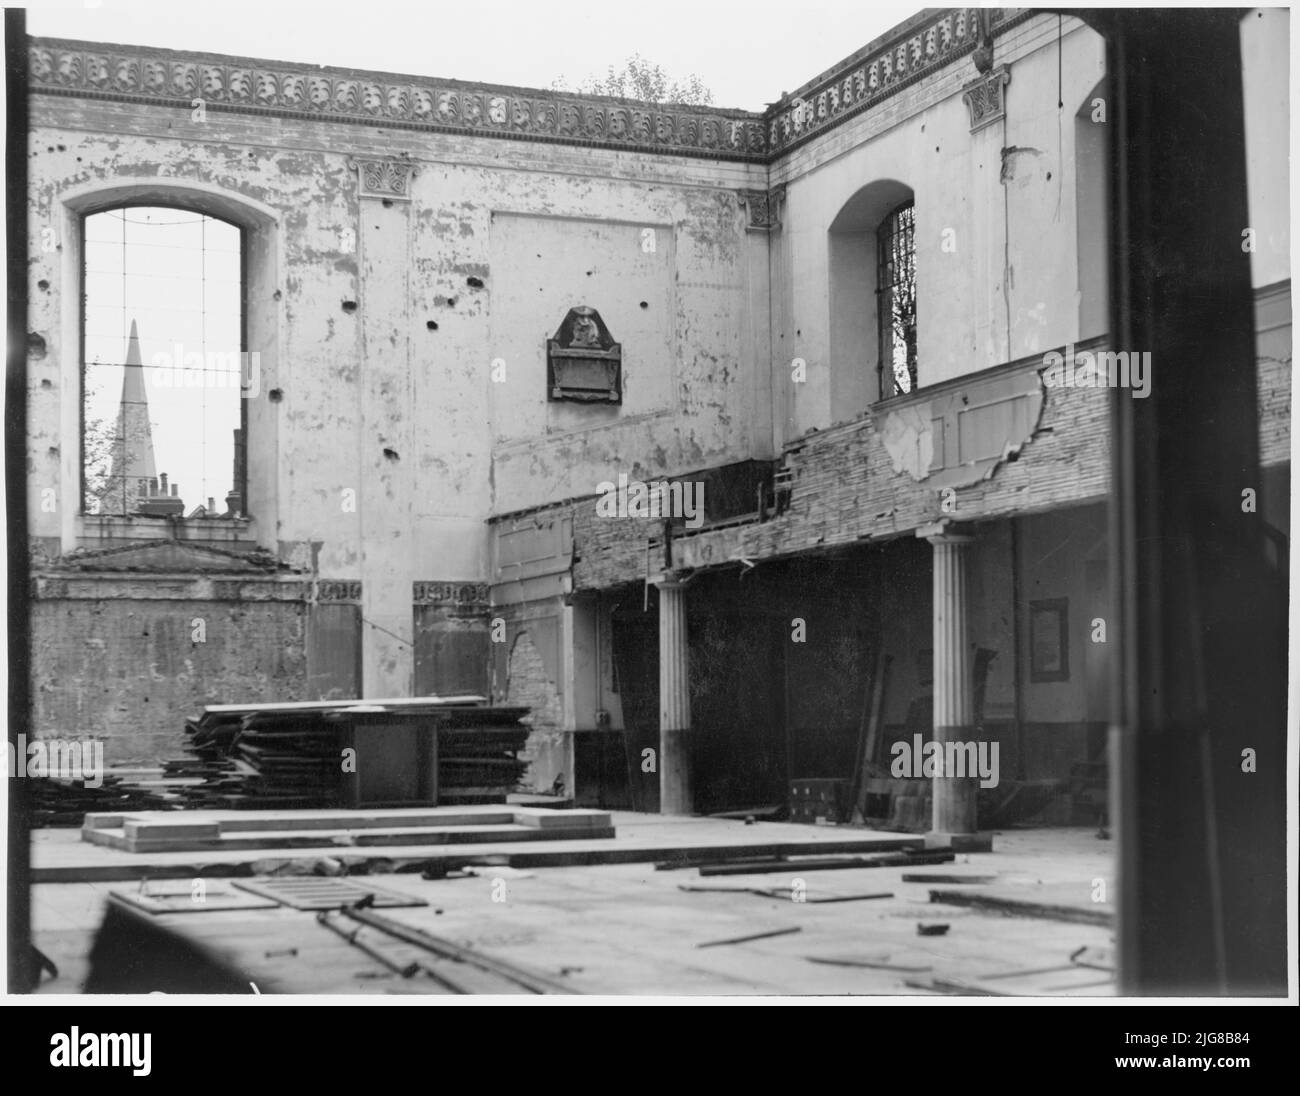 St John's Church, Waterloo Road, Lambeth, Greater London Authority, 07-06-1941. Interior view of the bomb damaged remains of St John's Church, showing the east end. St John's Church was originally built in 1823-4 to designs by the architect Francis Bedford. It was one of four churches built in Lambeth in the Greek Revival style. The church was damaged by bombs during the Second World War. It was later restored and designated as the Festival of Britain church in 1951. The negative of this image was destroyed in 1968. Stock Photo